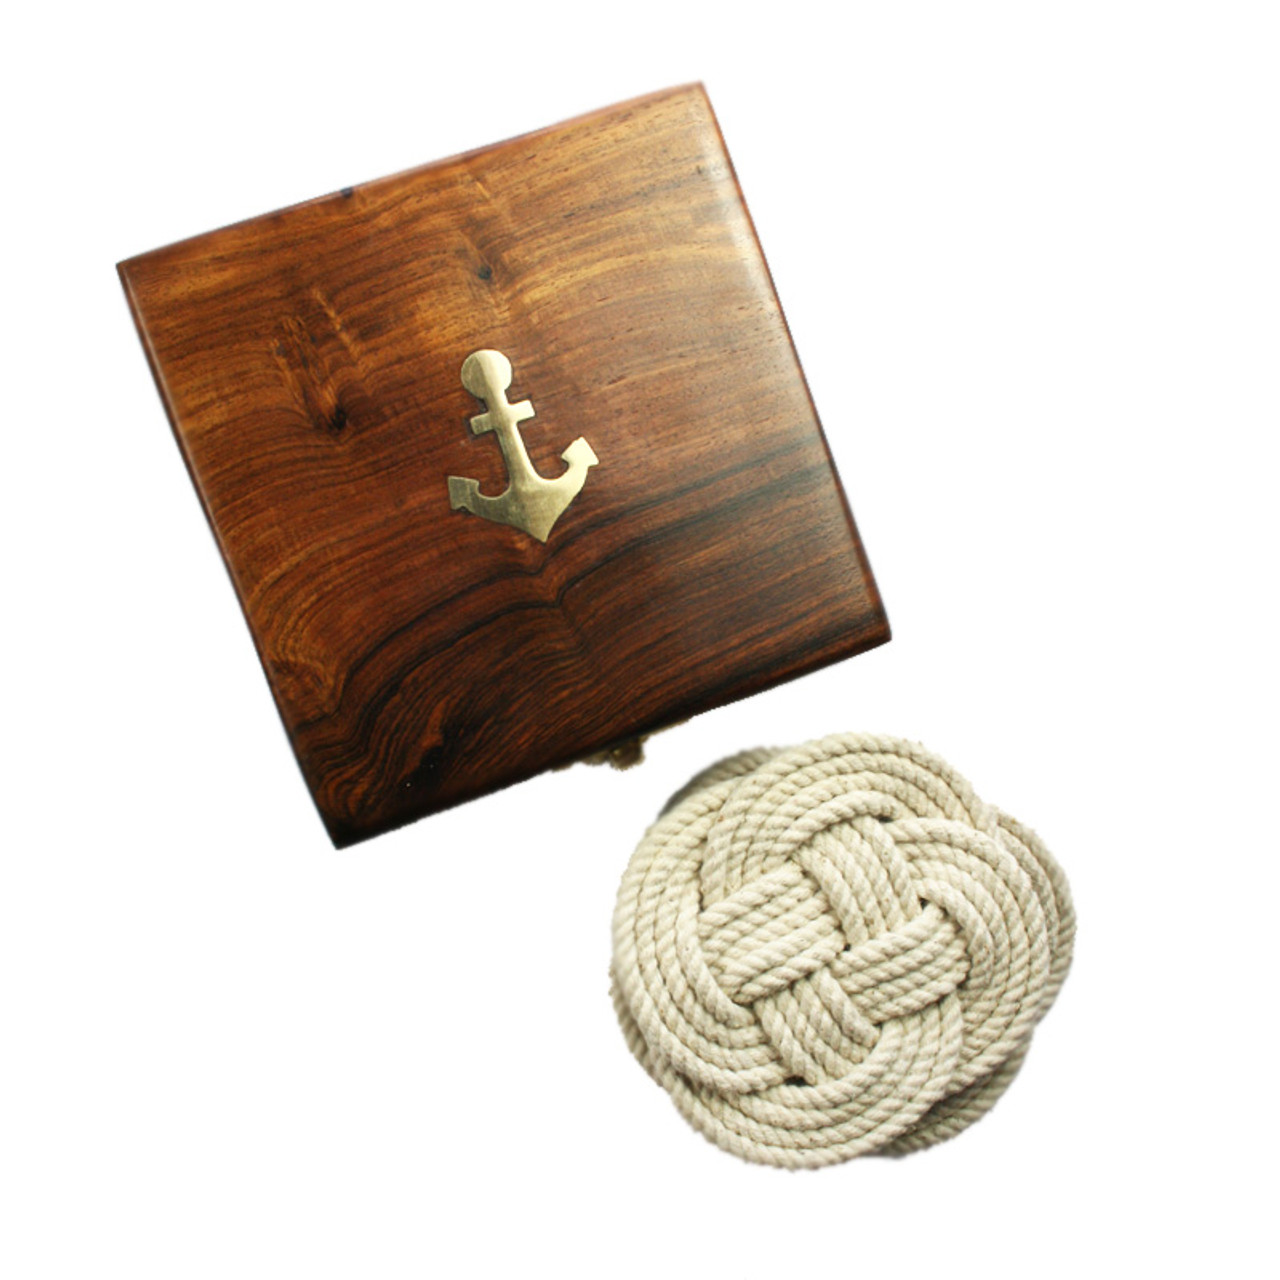 Two's Company Full Circle Jute Rope Coasters, Set of 4, 4.25-inch